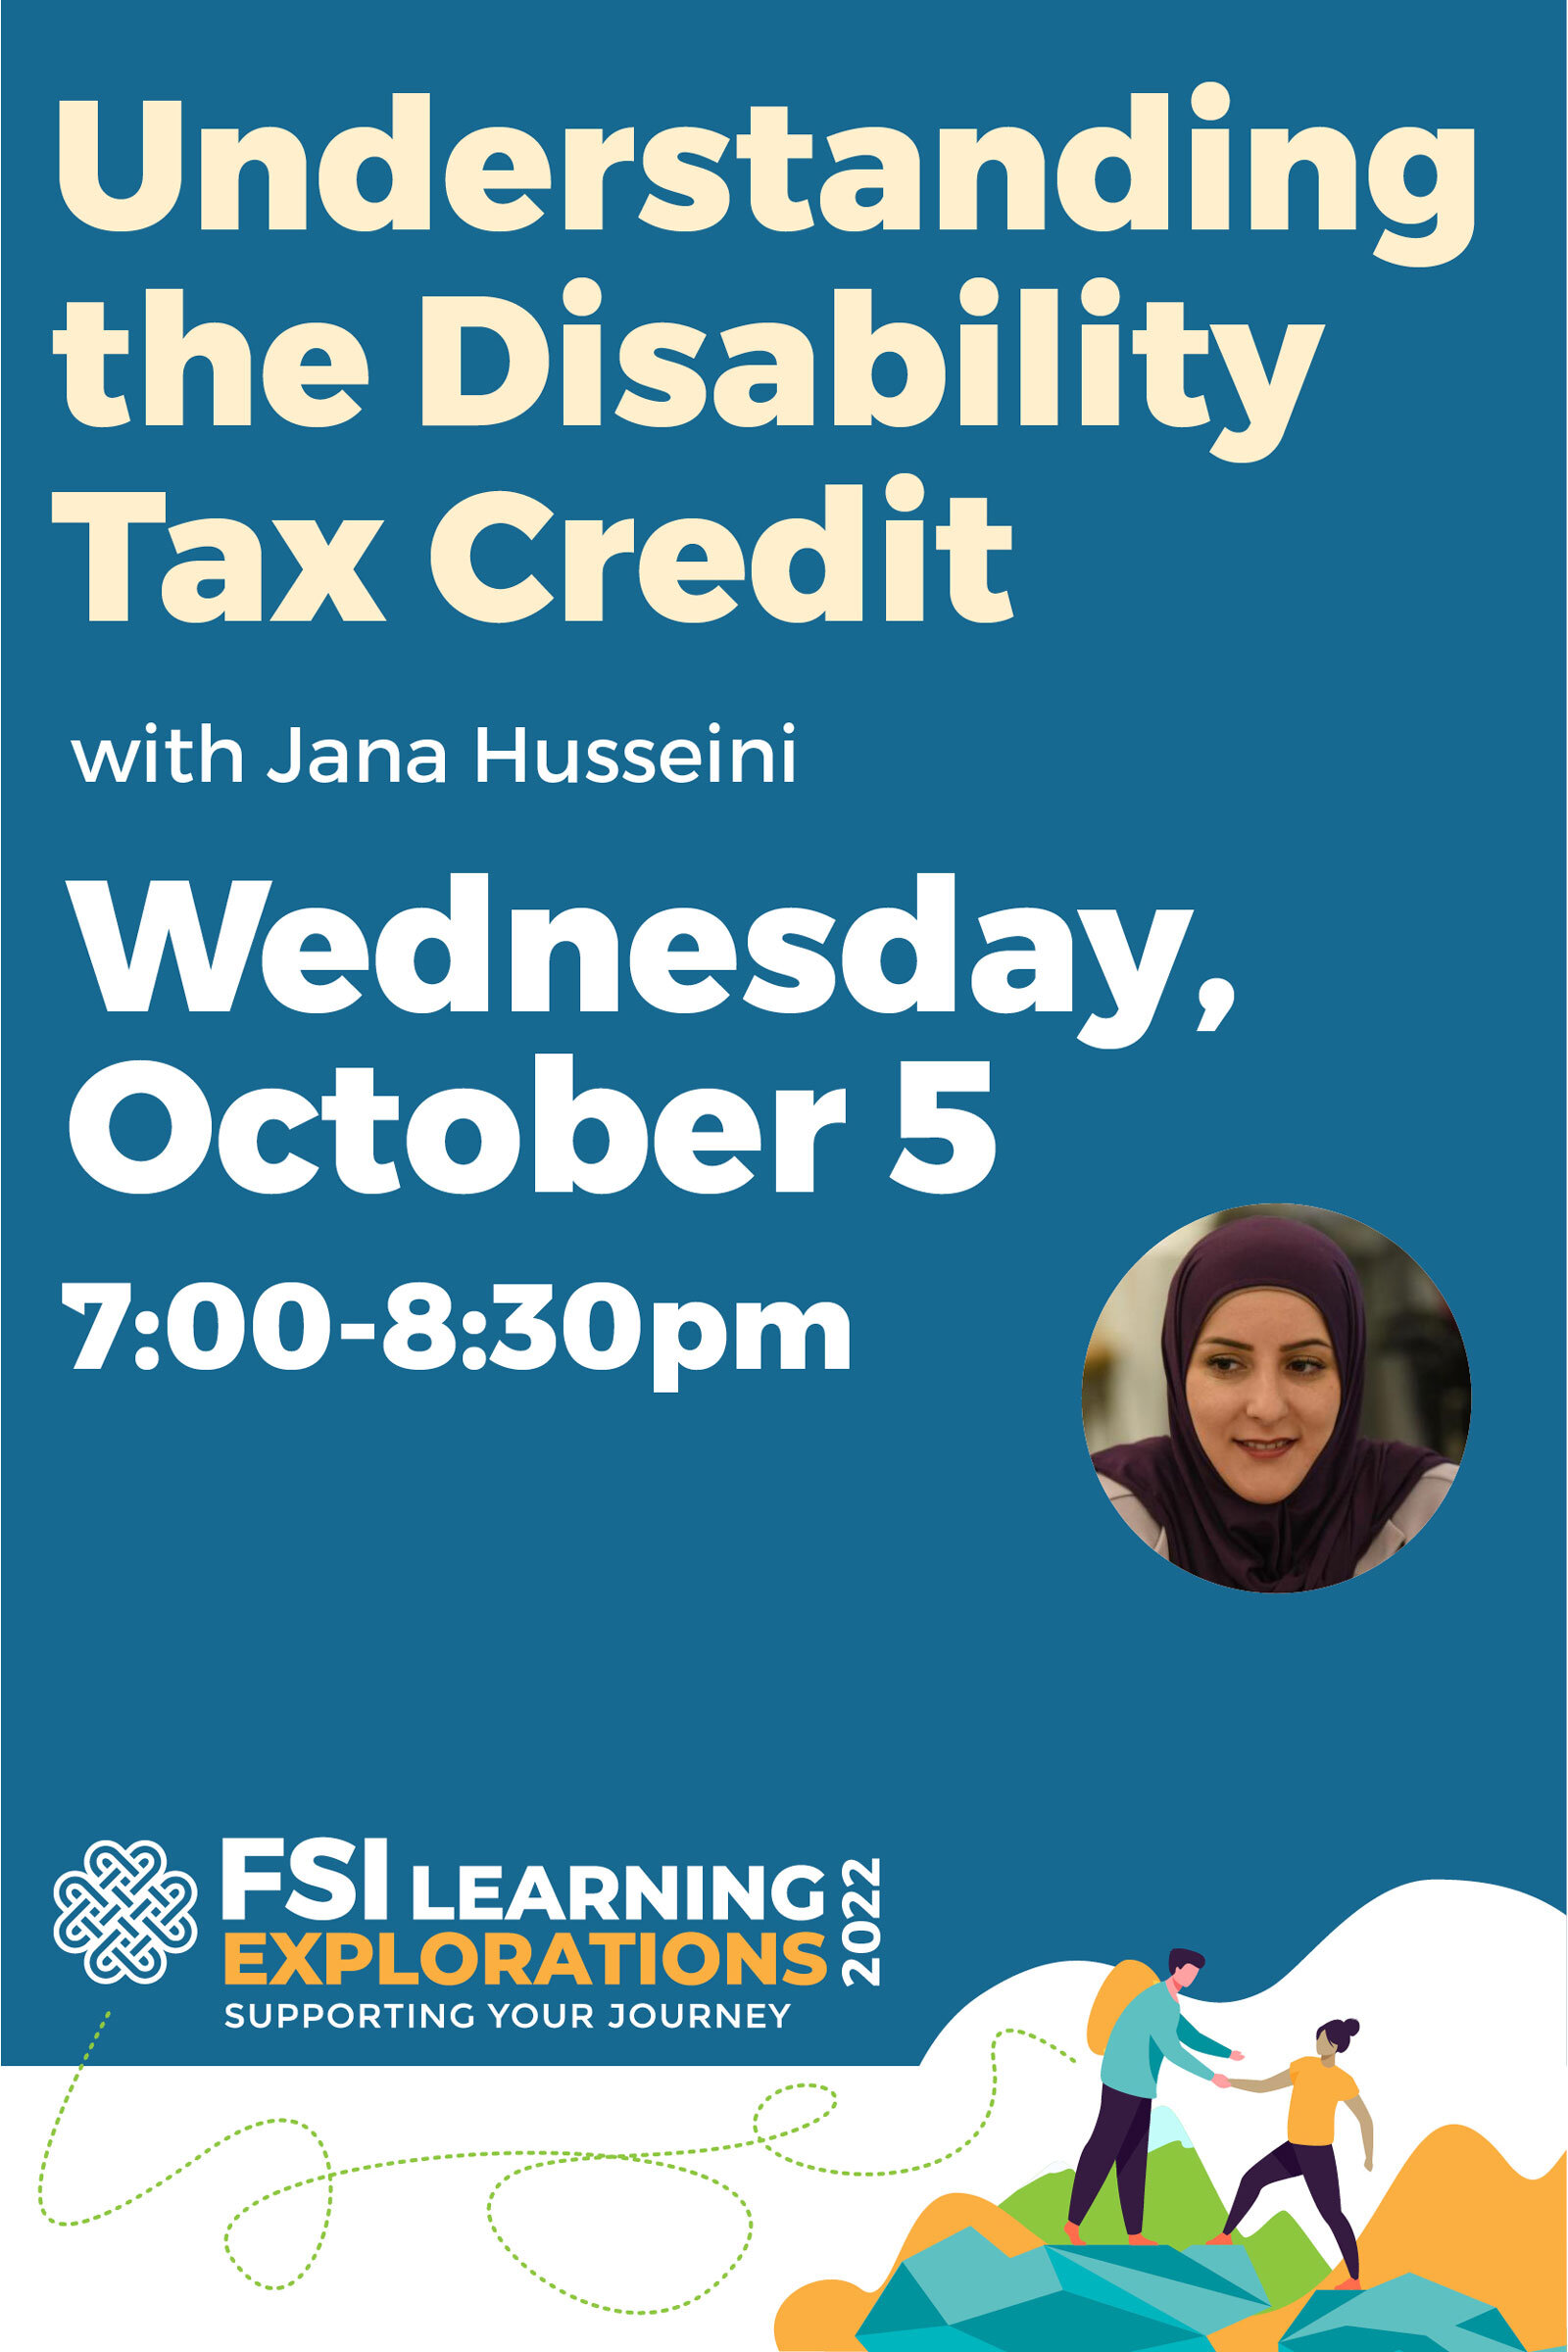 FSI Learning Explorations - Understanding the Disability Tax Credit